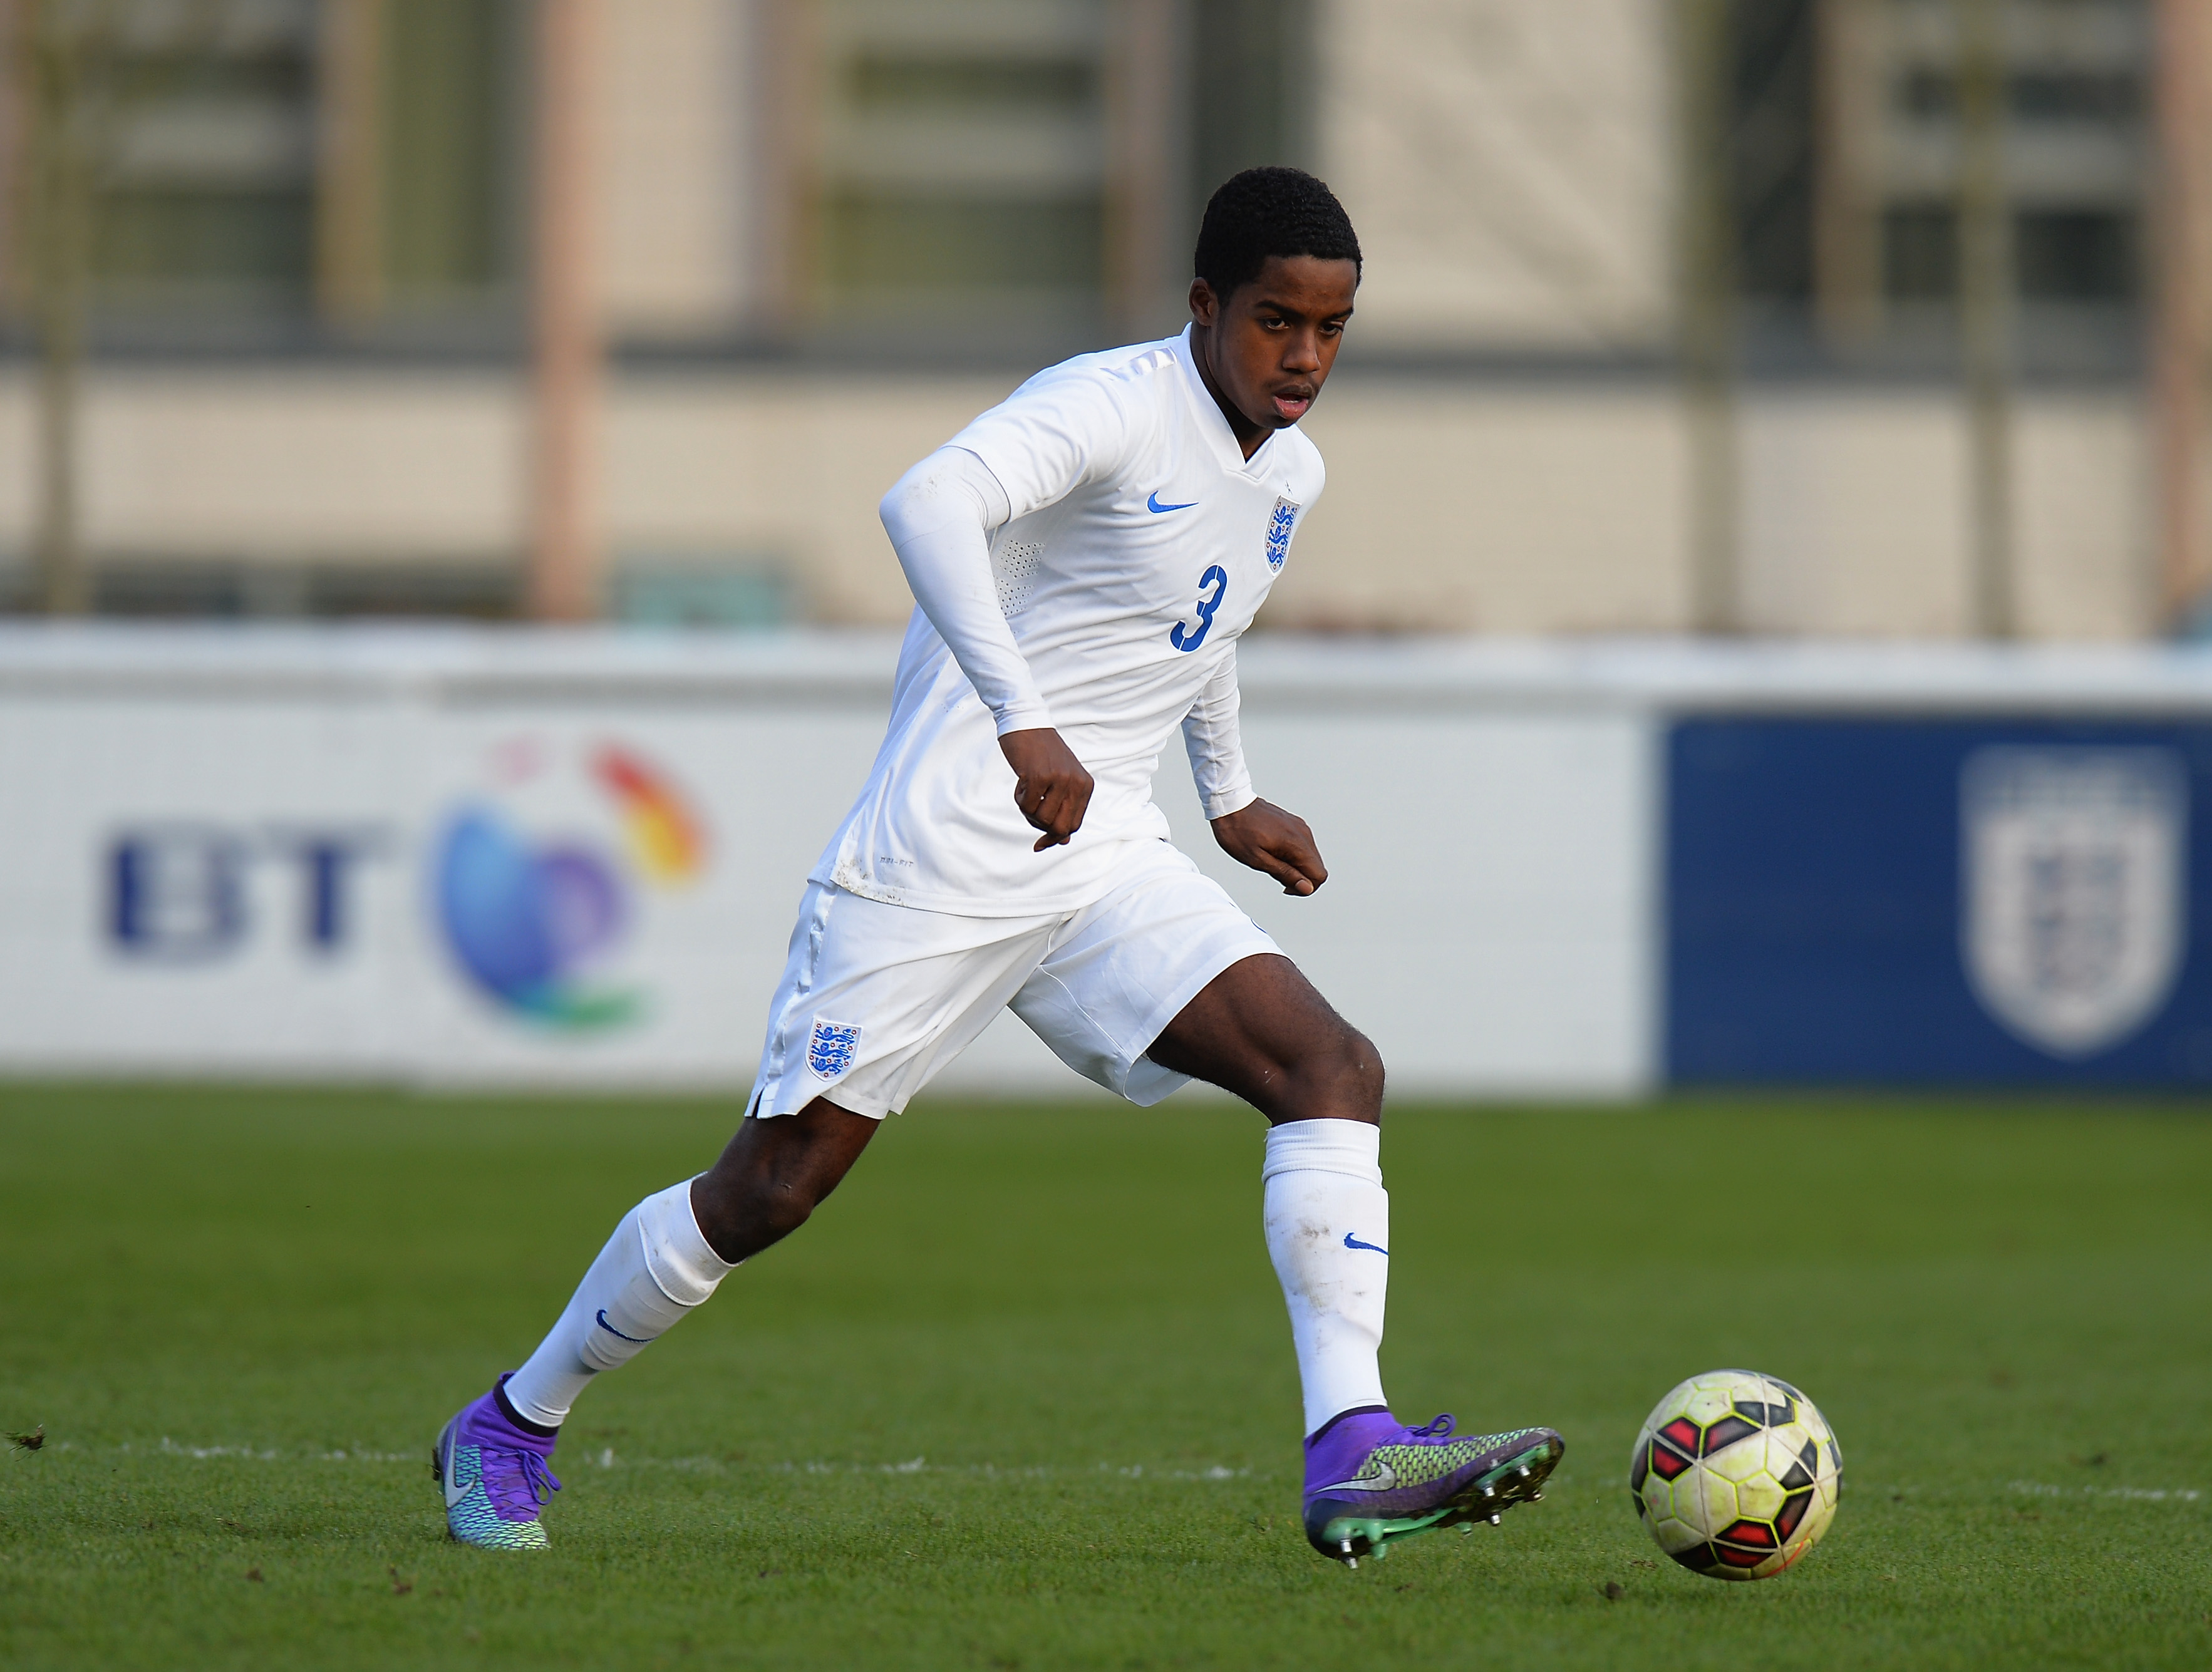 BURTON-UPON-TRENT, ENGLAND - FEBRUARY 16:  Ryan Sessegnon of England U16 during the U16s International Friendly match between England U16 and Norway U16 at St Georges Park on February 16, 2016 in Burton-upon-Trent, England.  (Photo by Tony Marshall/Getty Images)